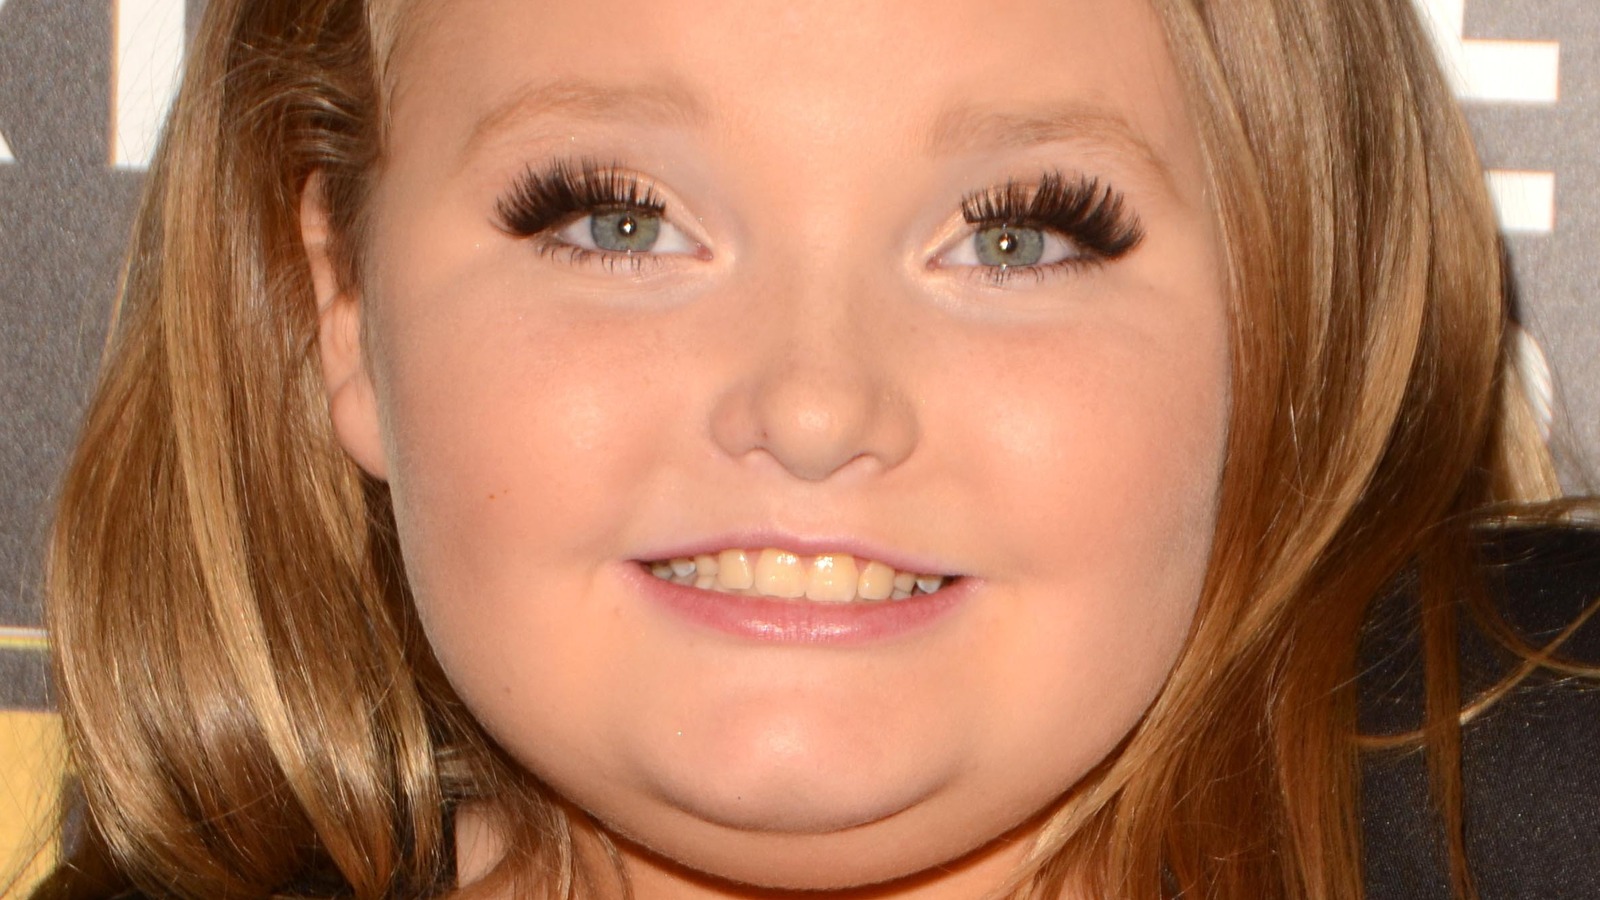 Honey Boo Boo’s Instagram Photo with Boyfriend attracted Red-Eyed Fans